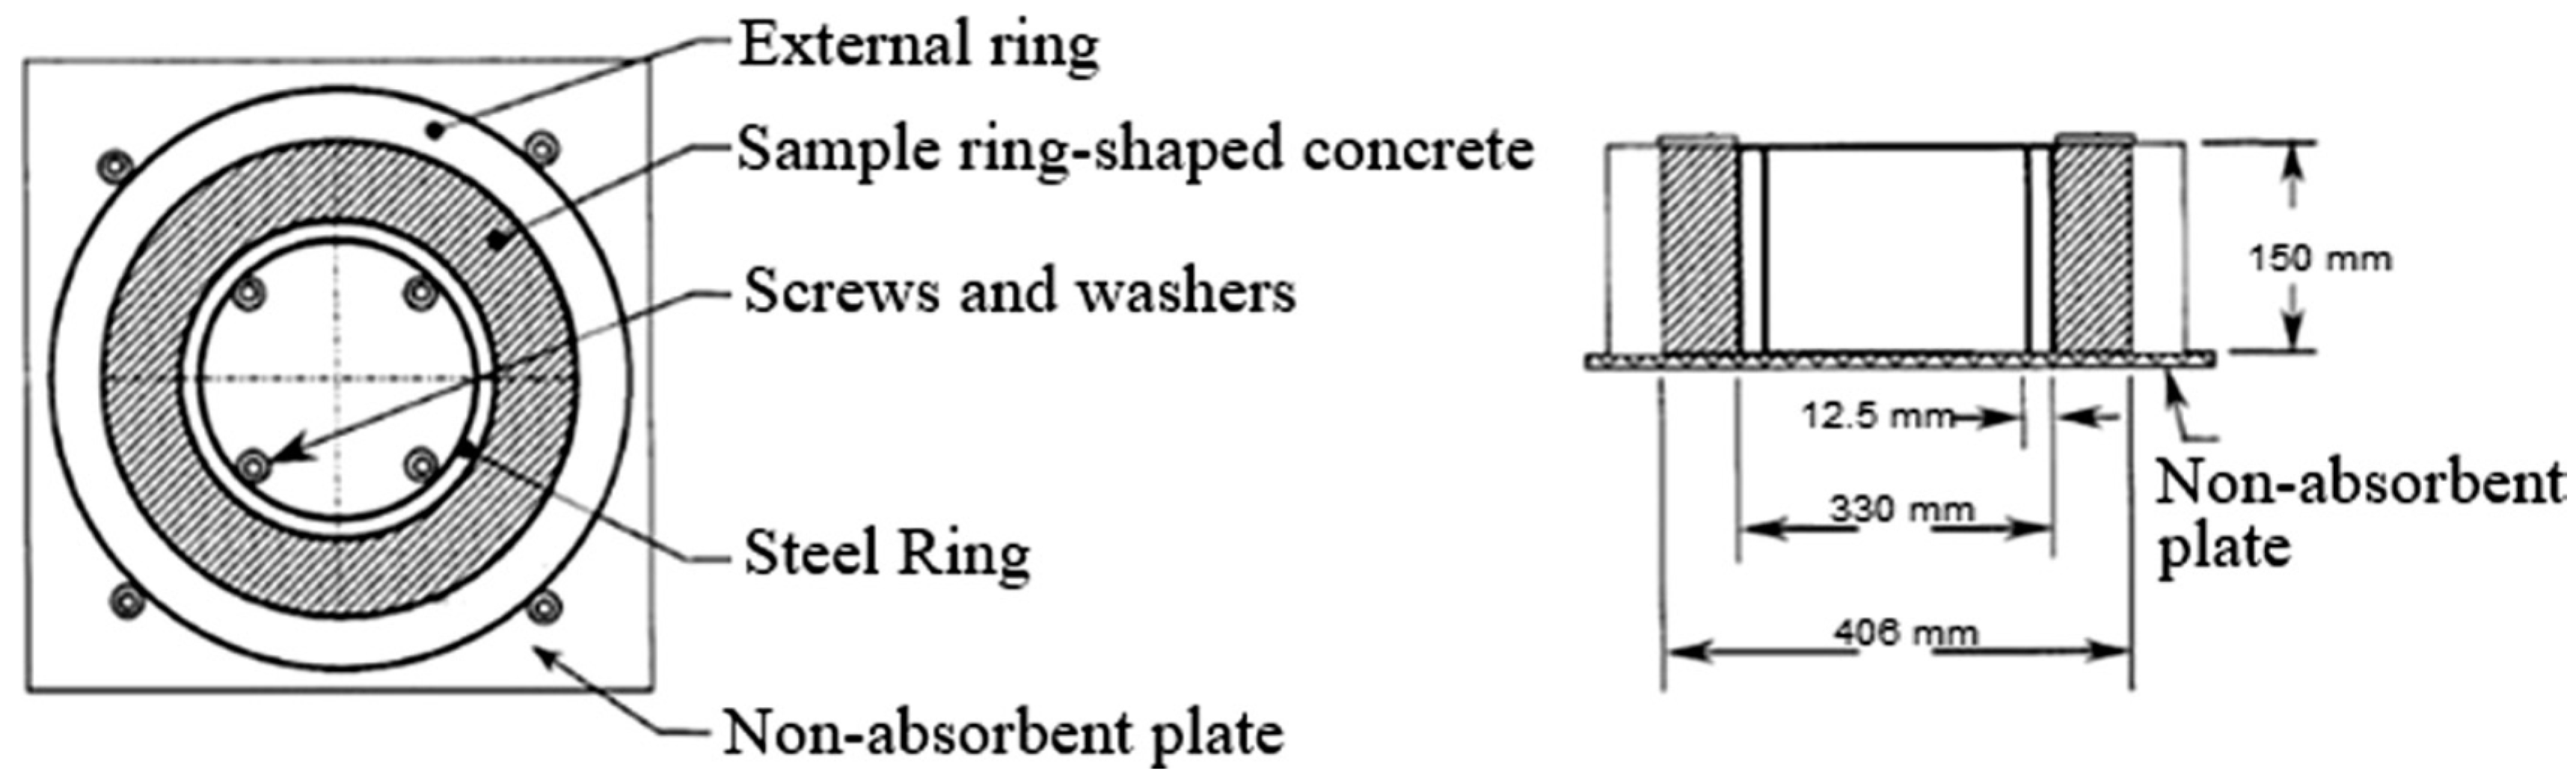 Cement Well Rings - Sri Vinayaka Cement Products